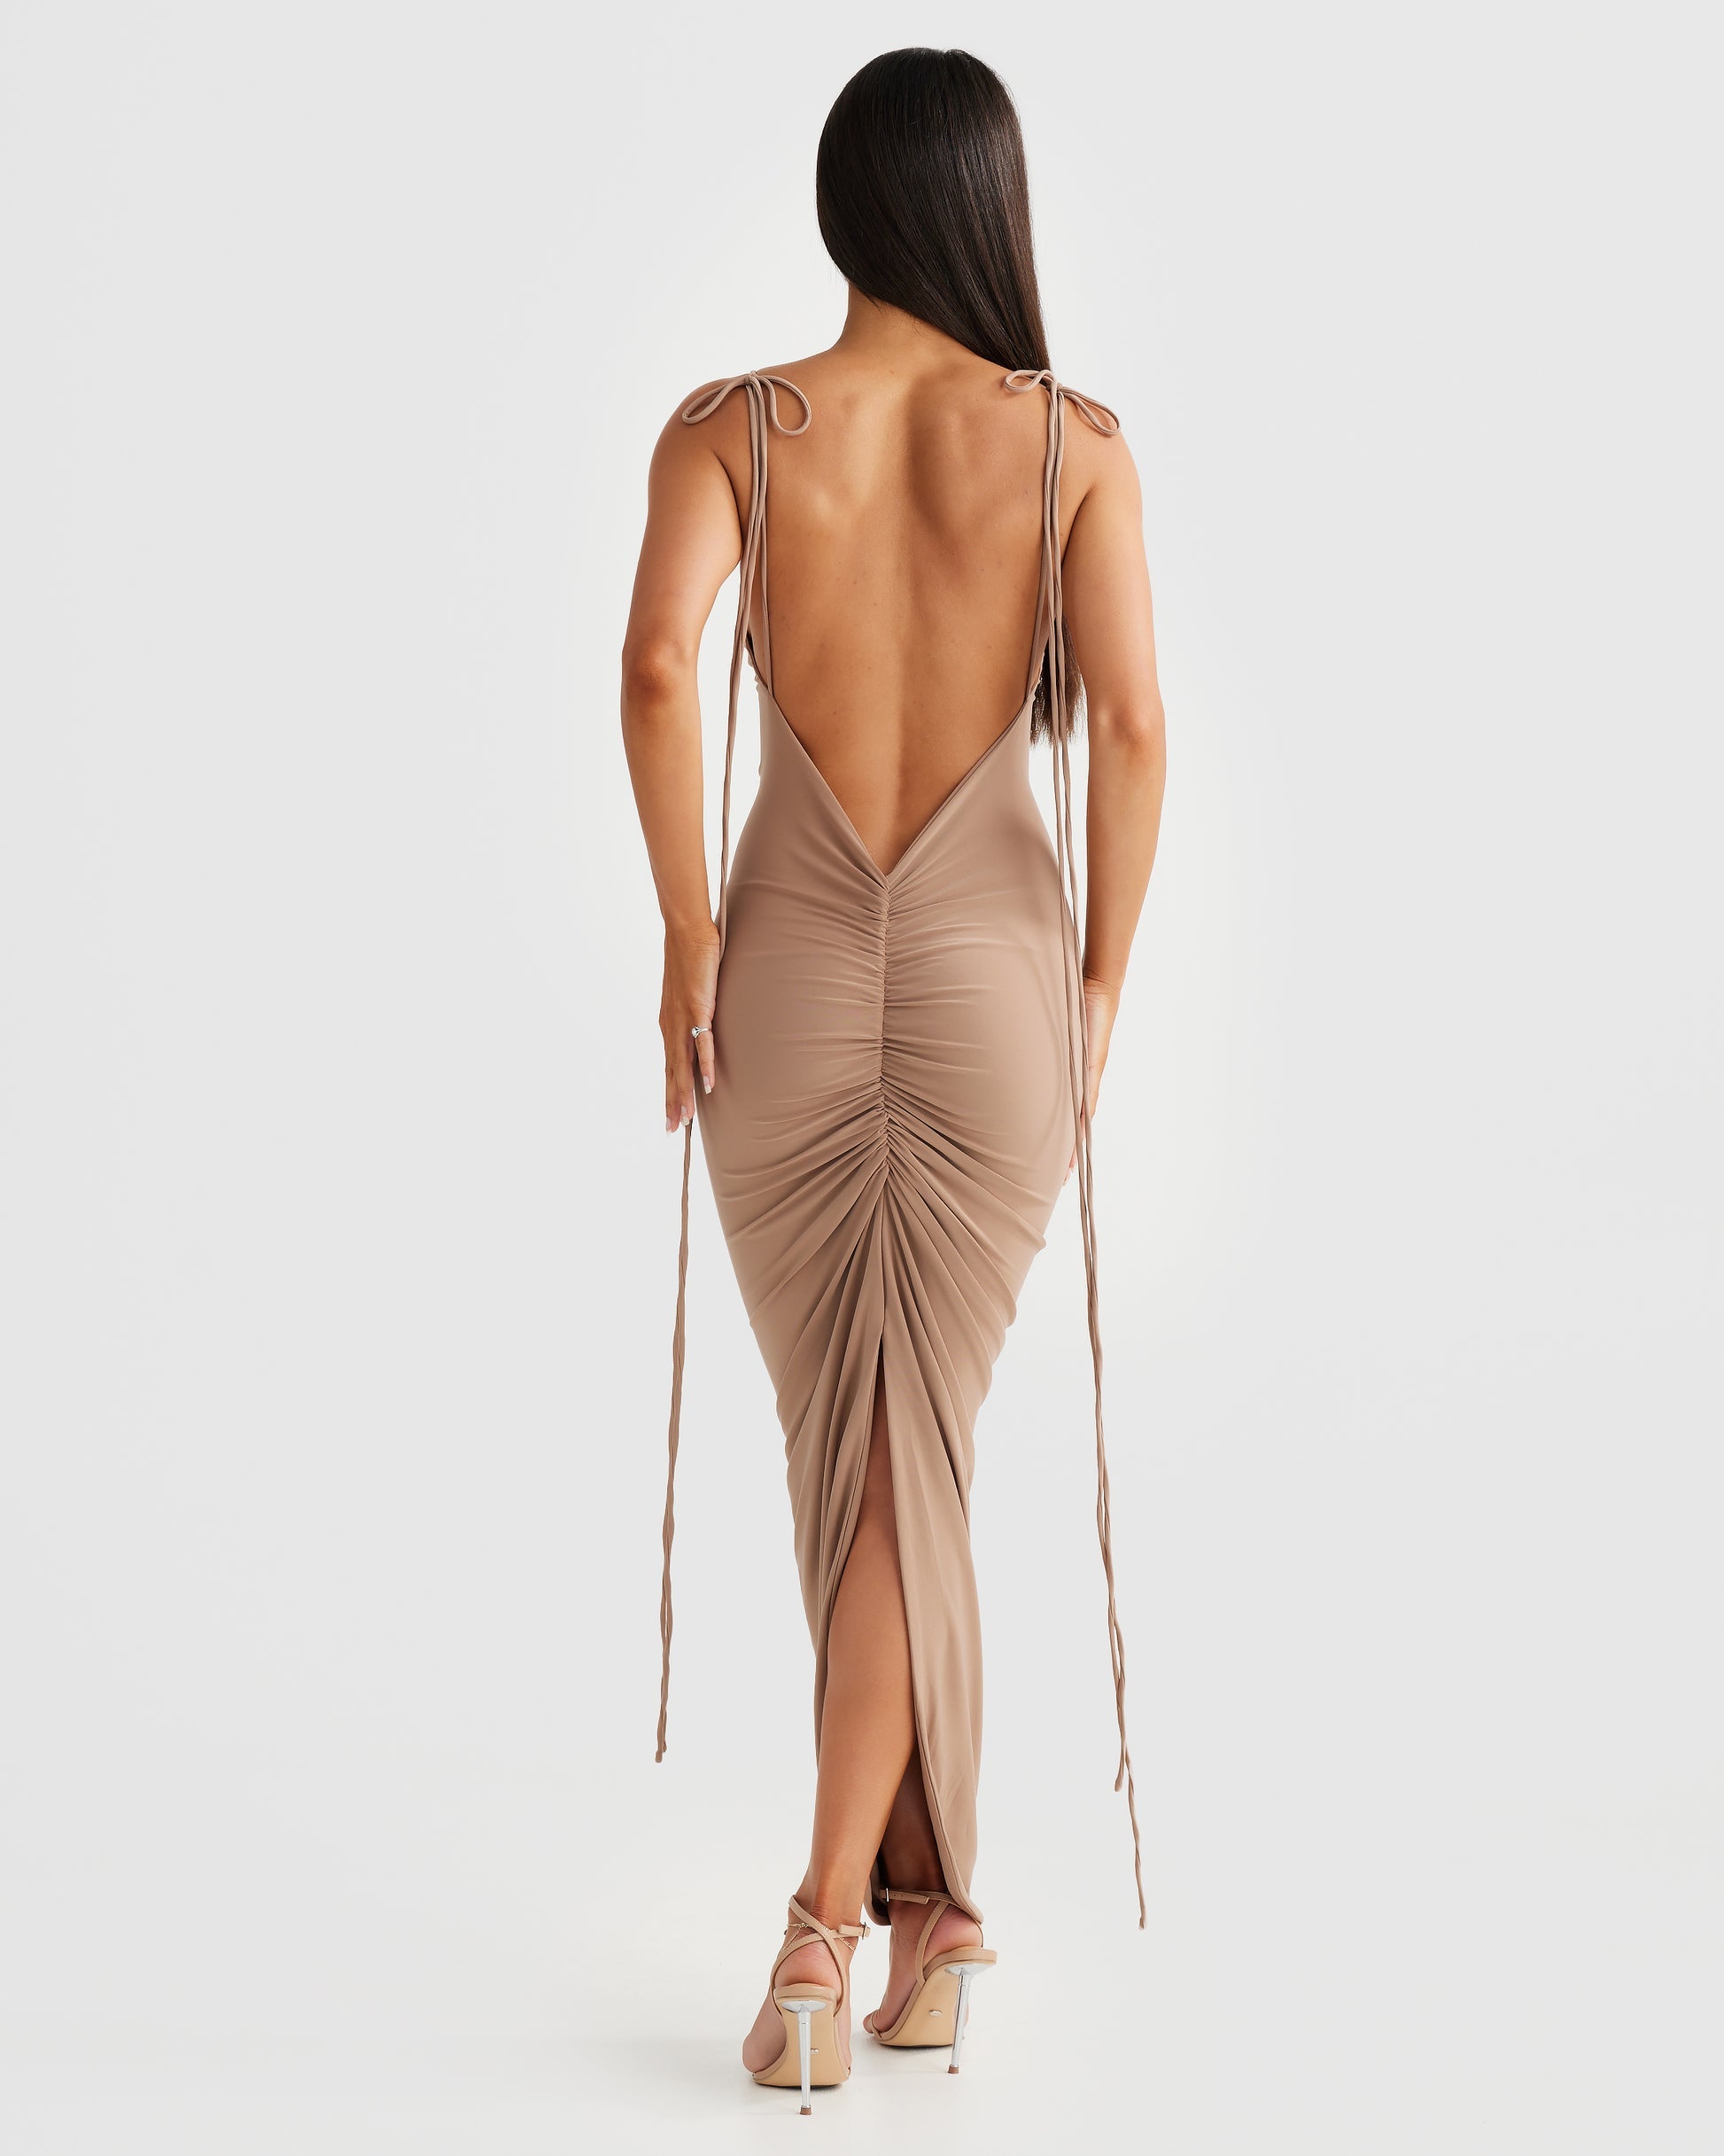 MÉLANI The Label CLEO Latte Bum Ruched Backless Dress